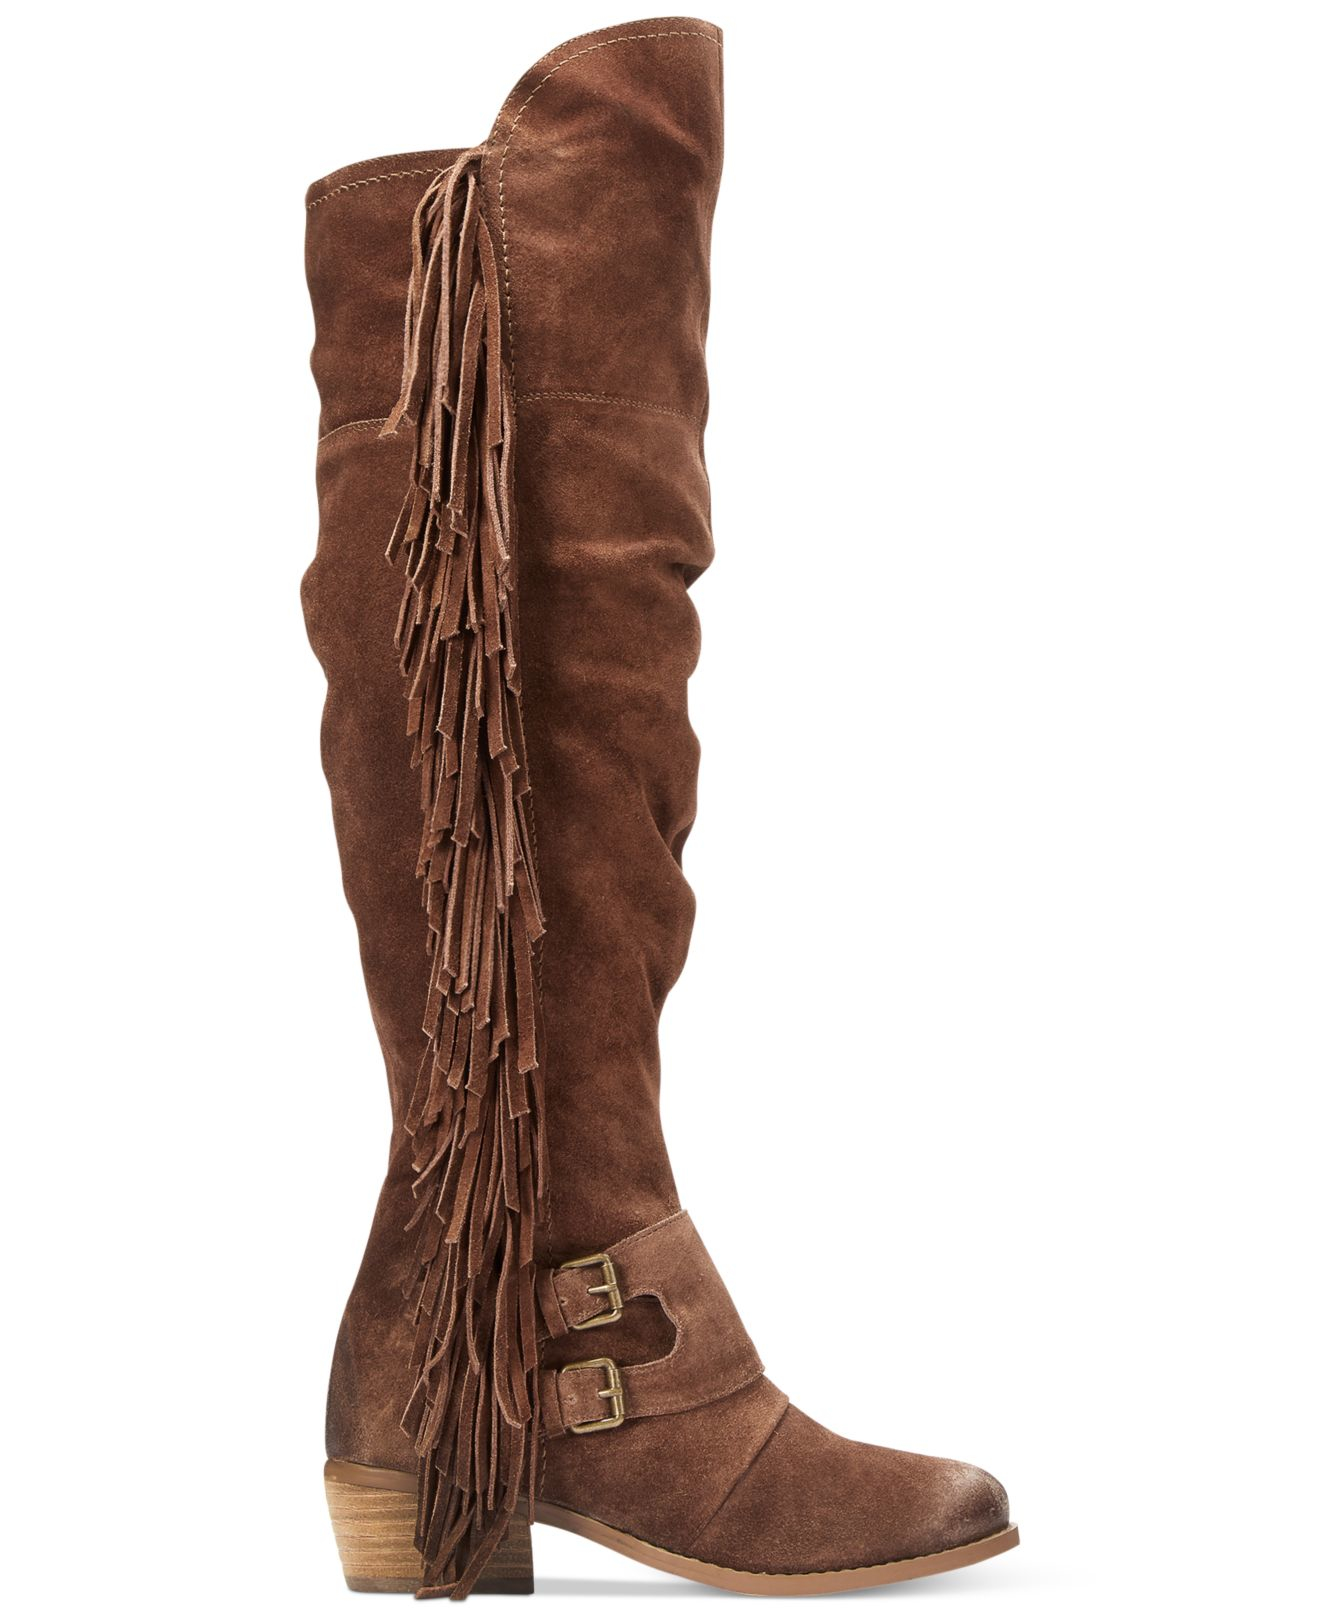 Naughty Monkey Frilly Fanta Over-the-knee Fringe Boots in Brown | Lyst